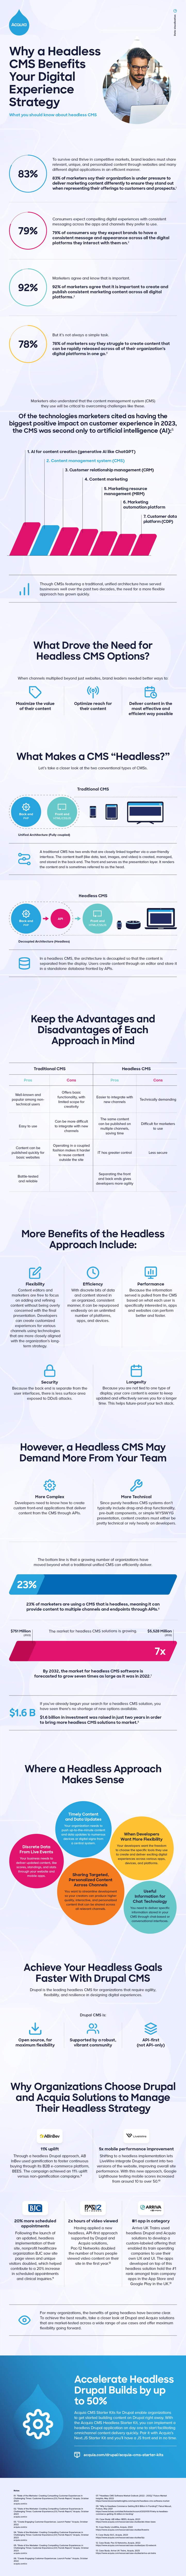 Infographic about the rise of headless CMS